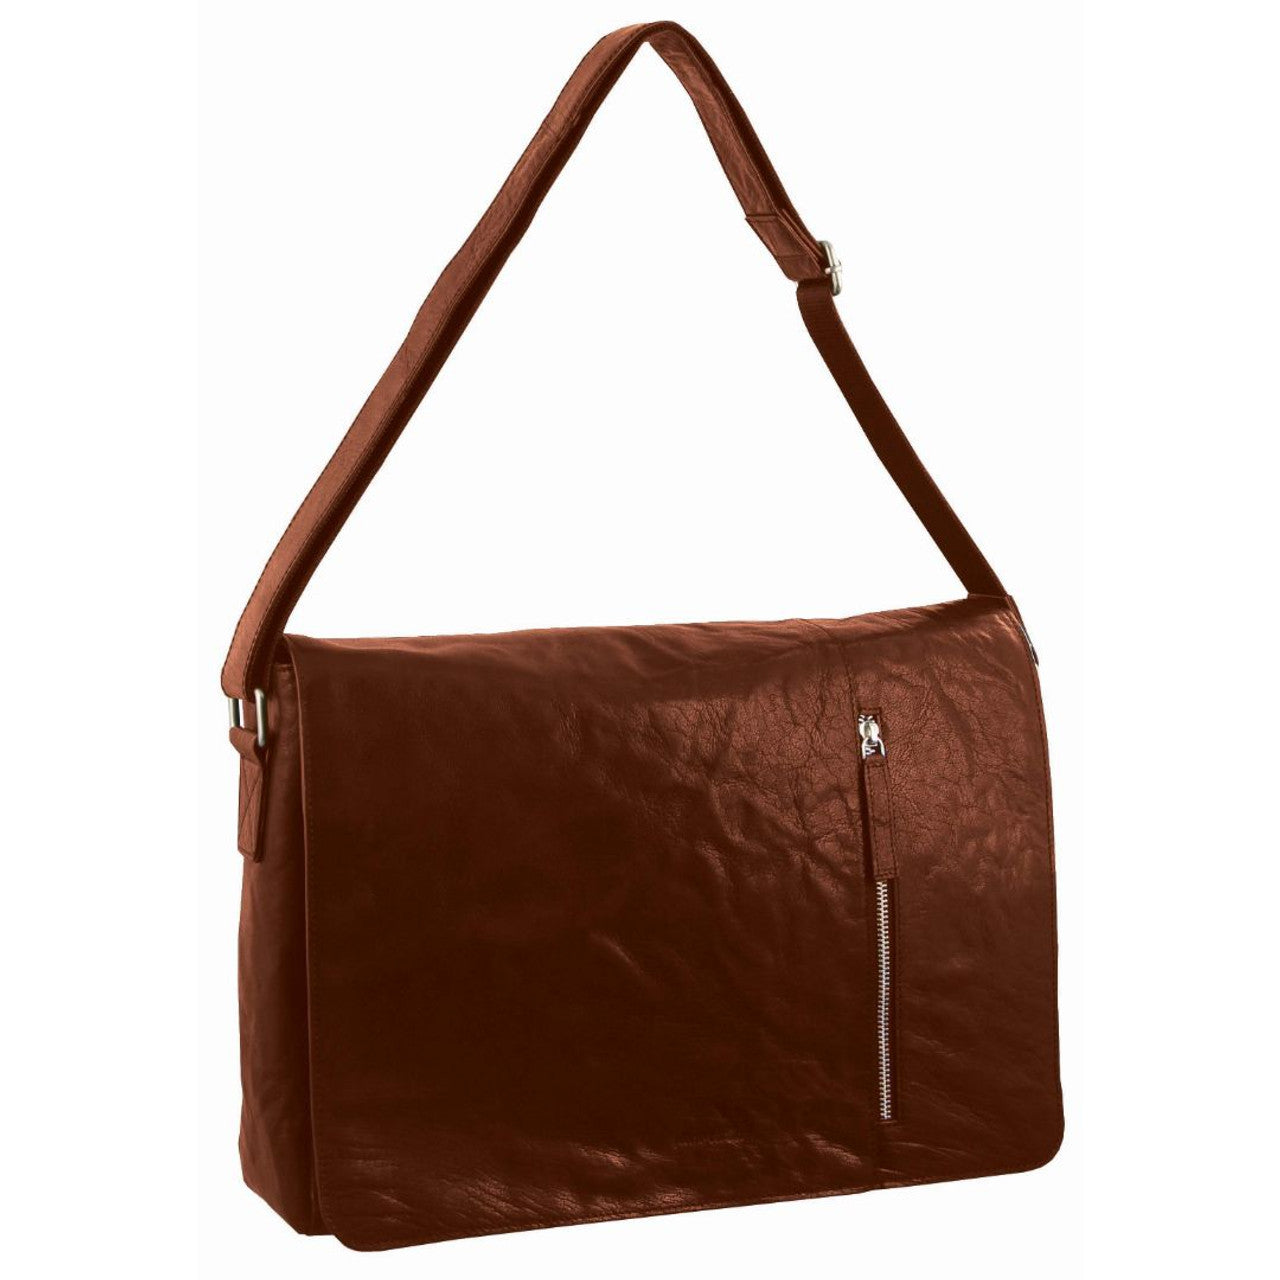 Pierre Cardin Rustic Leather Computer/Messenger Bag with flap closure